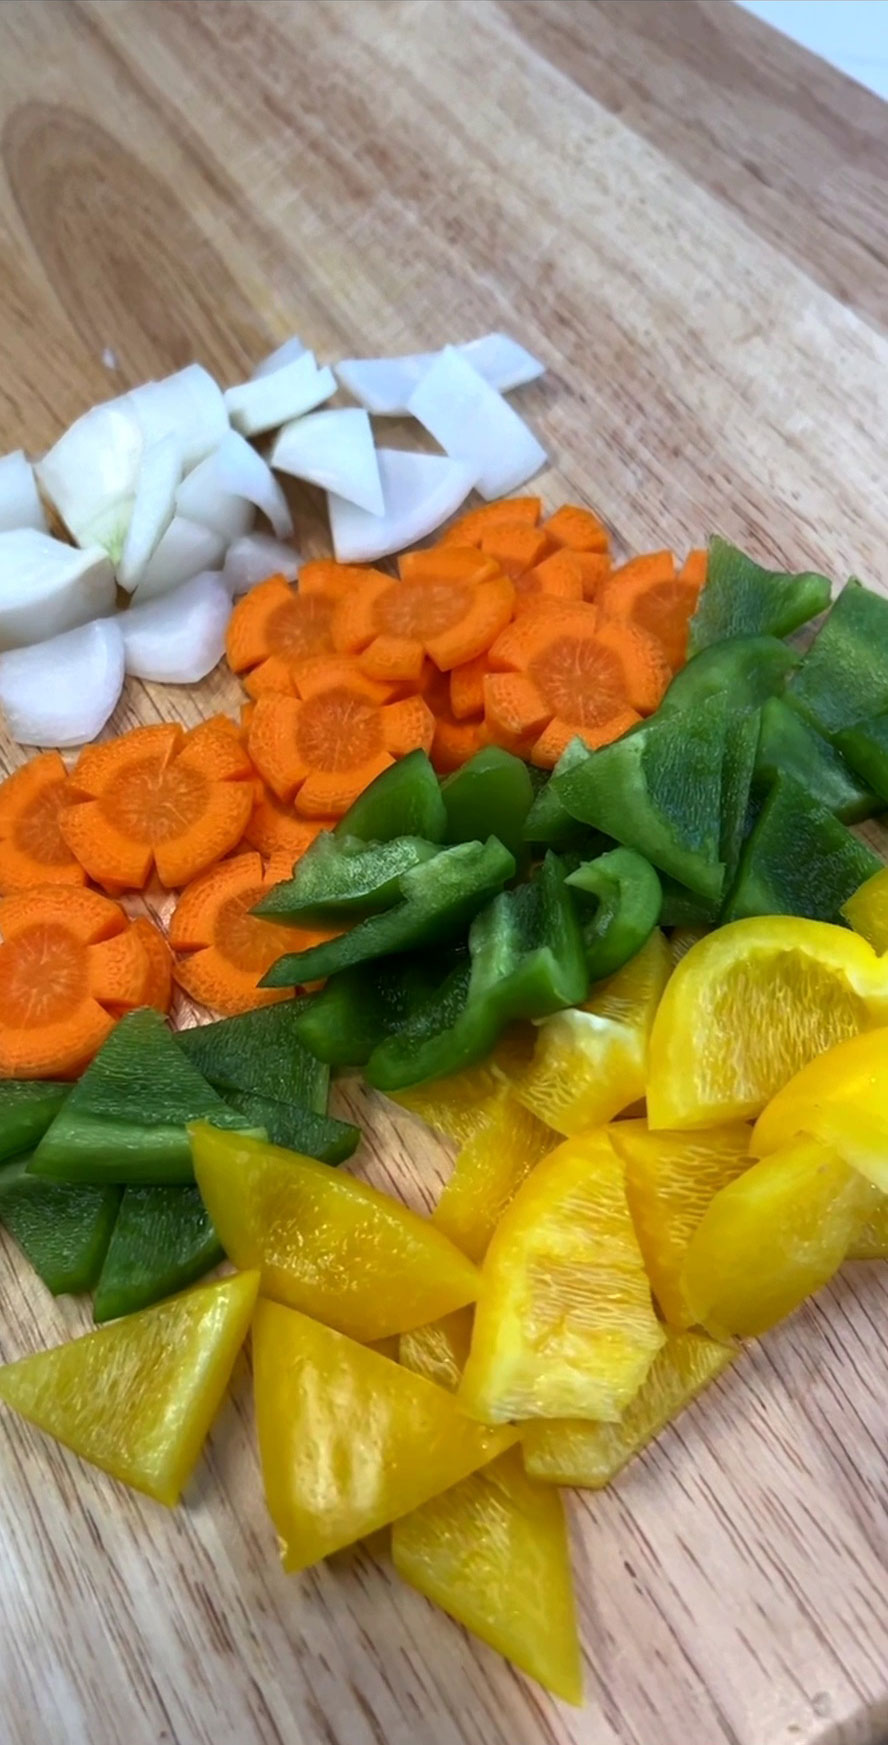 Onions, carrots, green and yellow peppers cut up and placed on top of the chopping board 